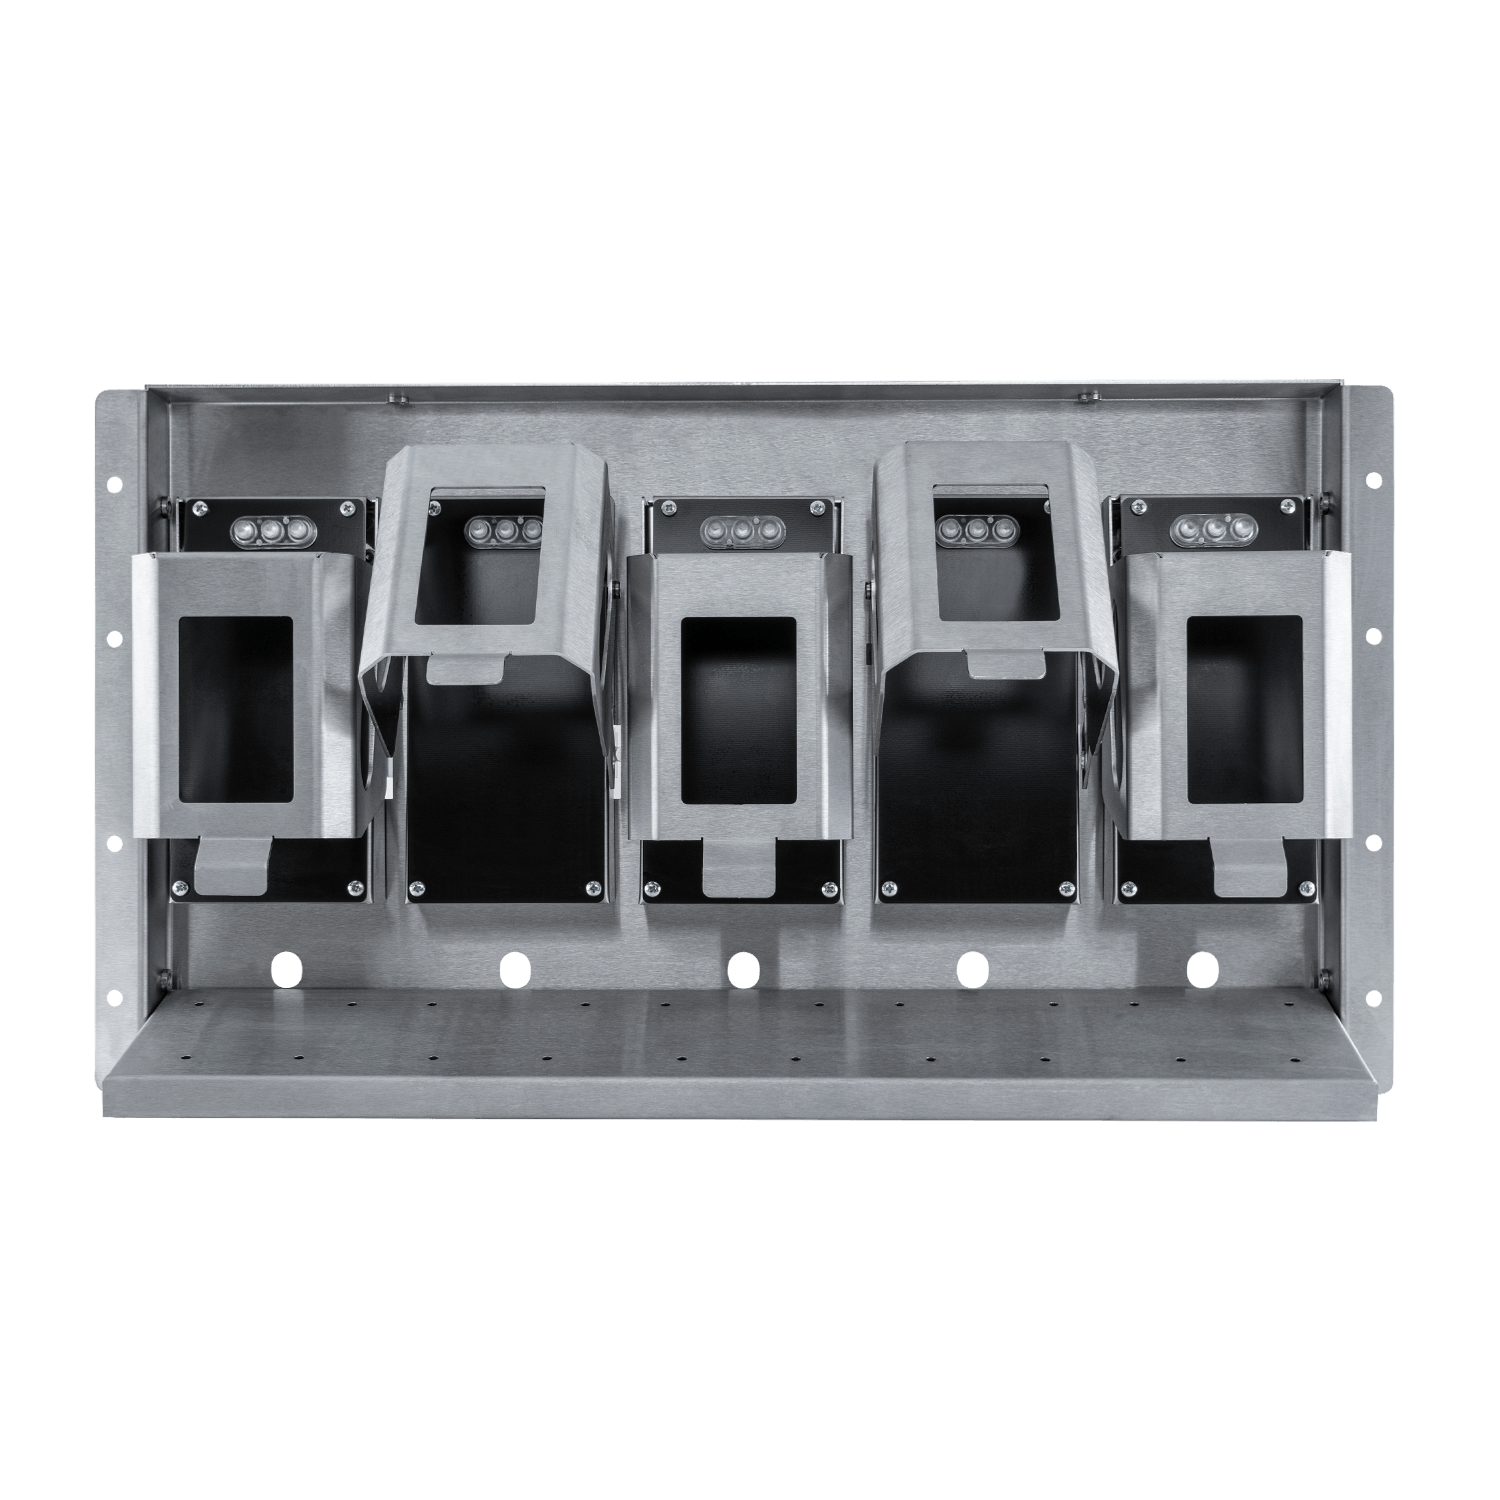 Built-in panel for the storage of 5 radios. Front view with open flaps